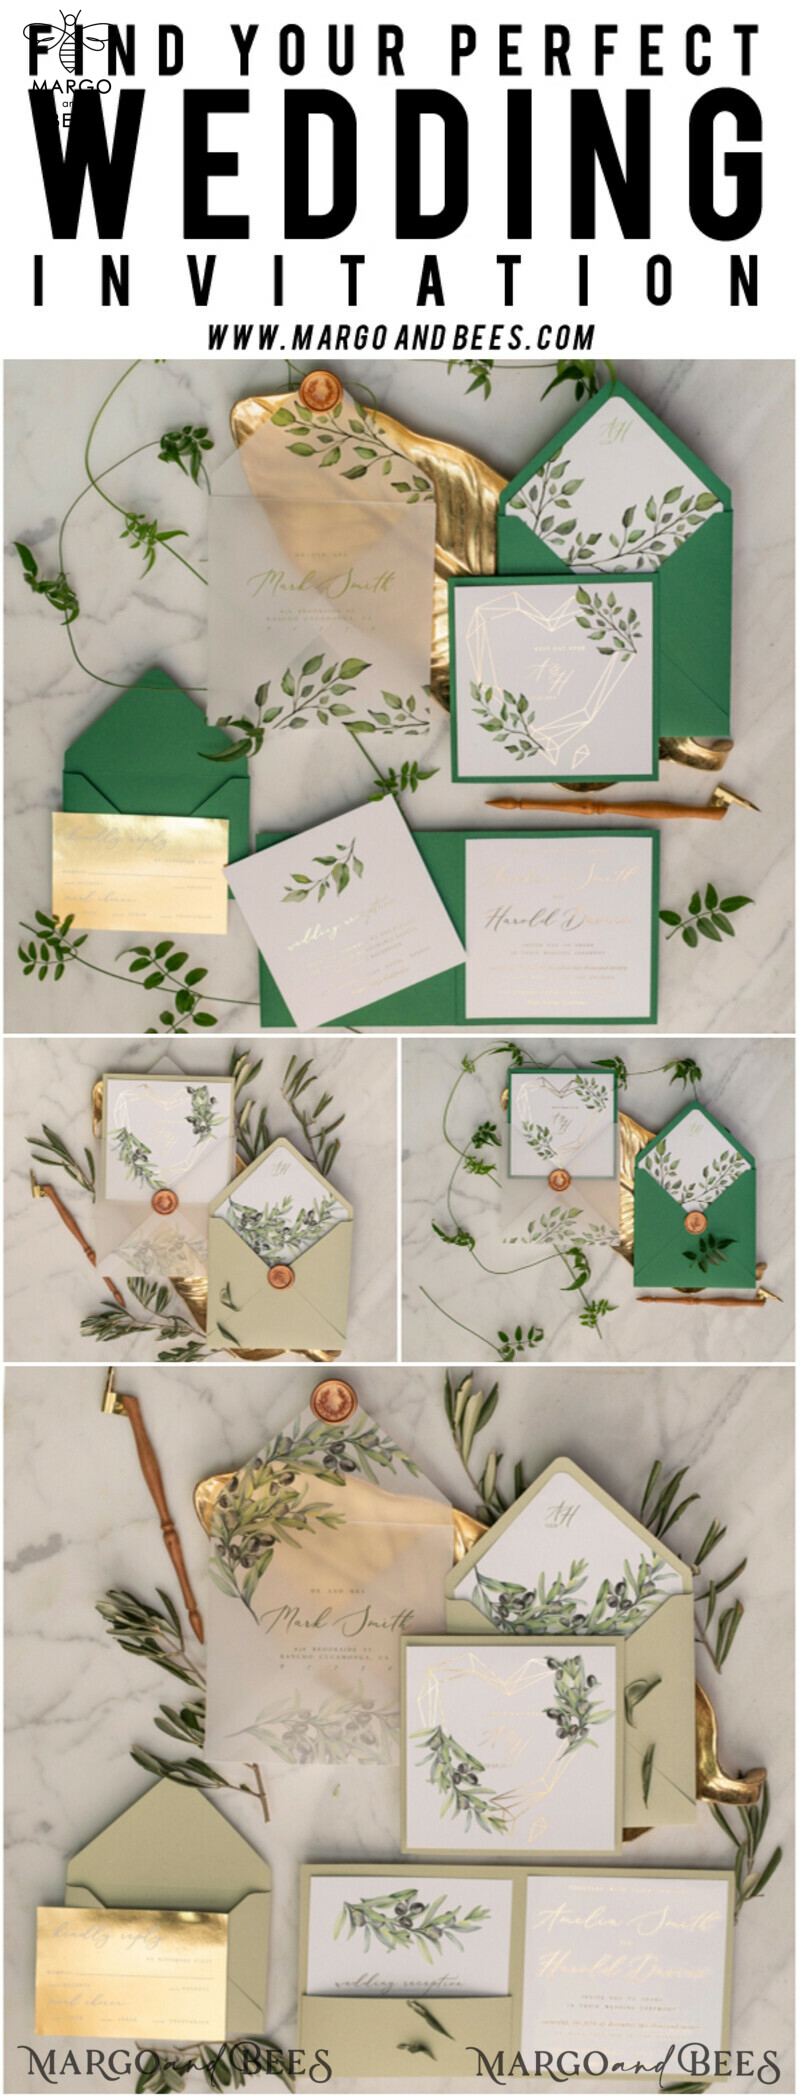 Luxury Gold Foil Wedding Invitations, Glamour Greenery Gold Wedding Invites, Elegant Pocketfold Wedding Cards, Geometric Vellum Wedding Invitation Suite-10